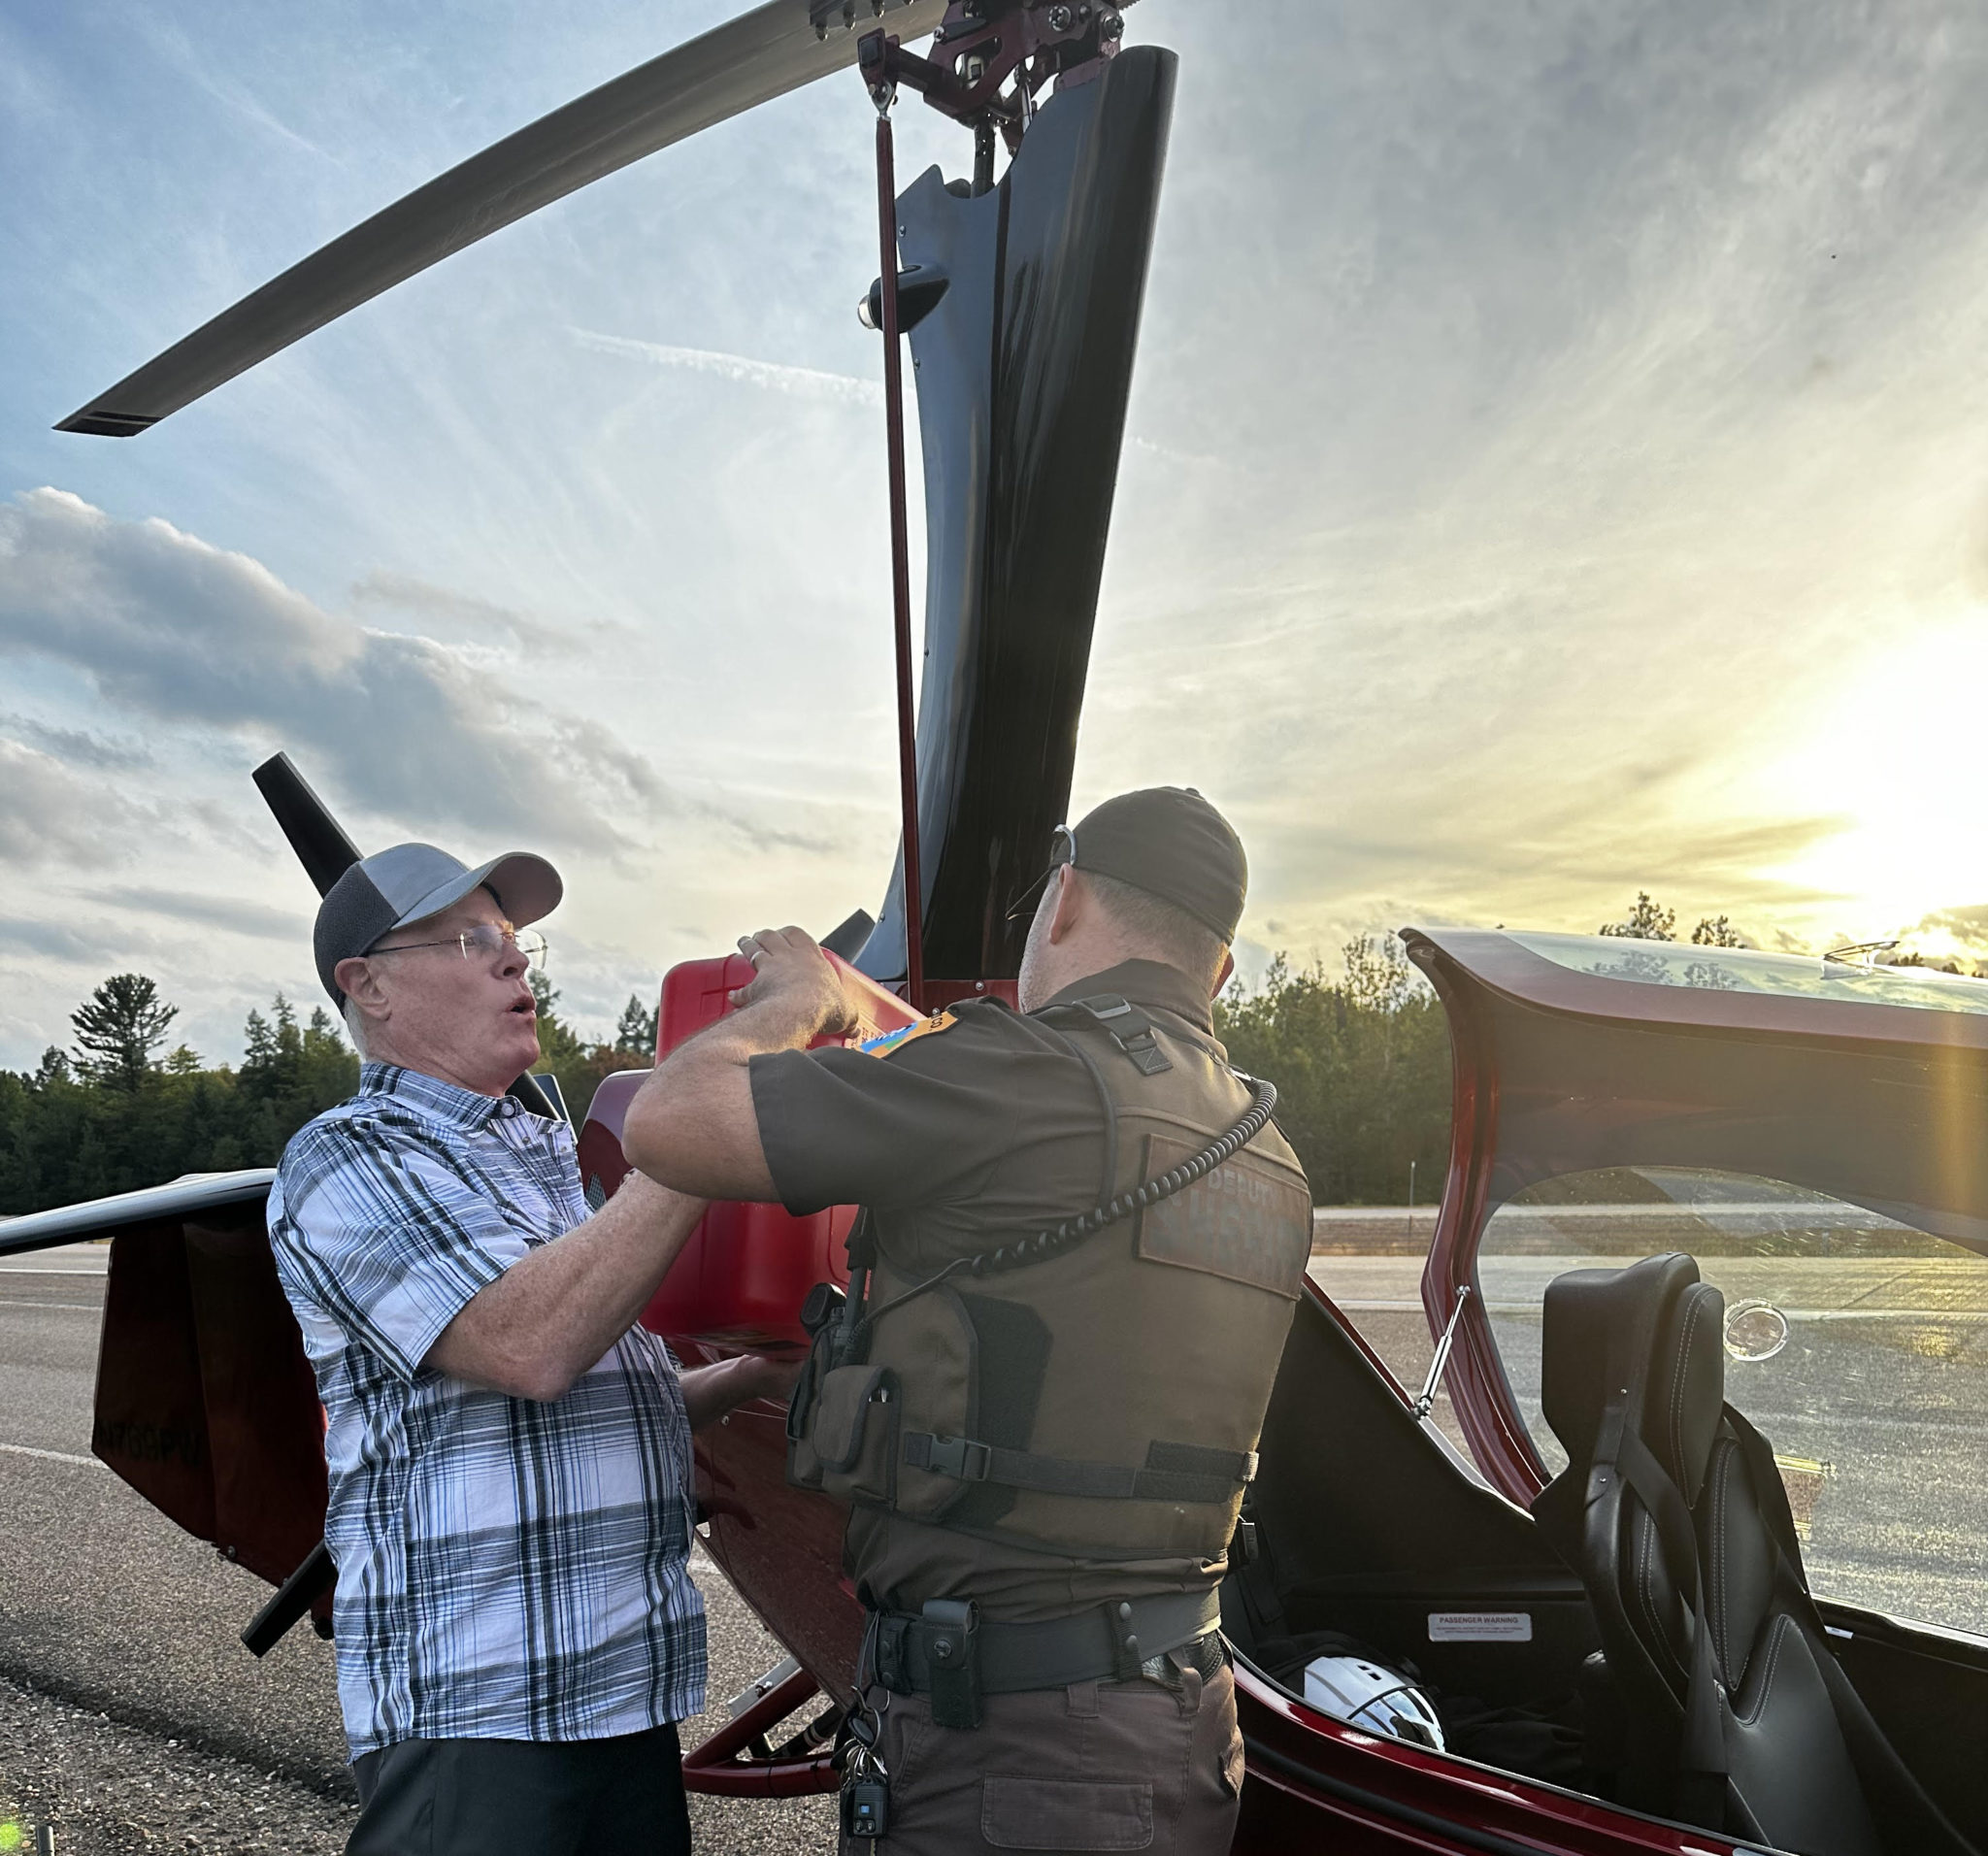 Lincoln County Sheriff’s deputy lends assistance after pilot lands gyrocopter along Hwy. 51